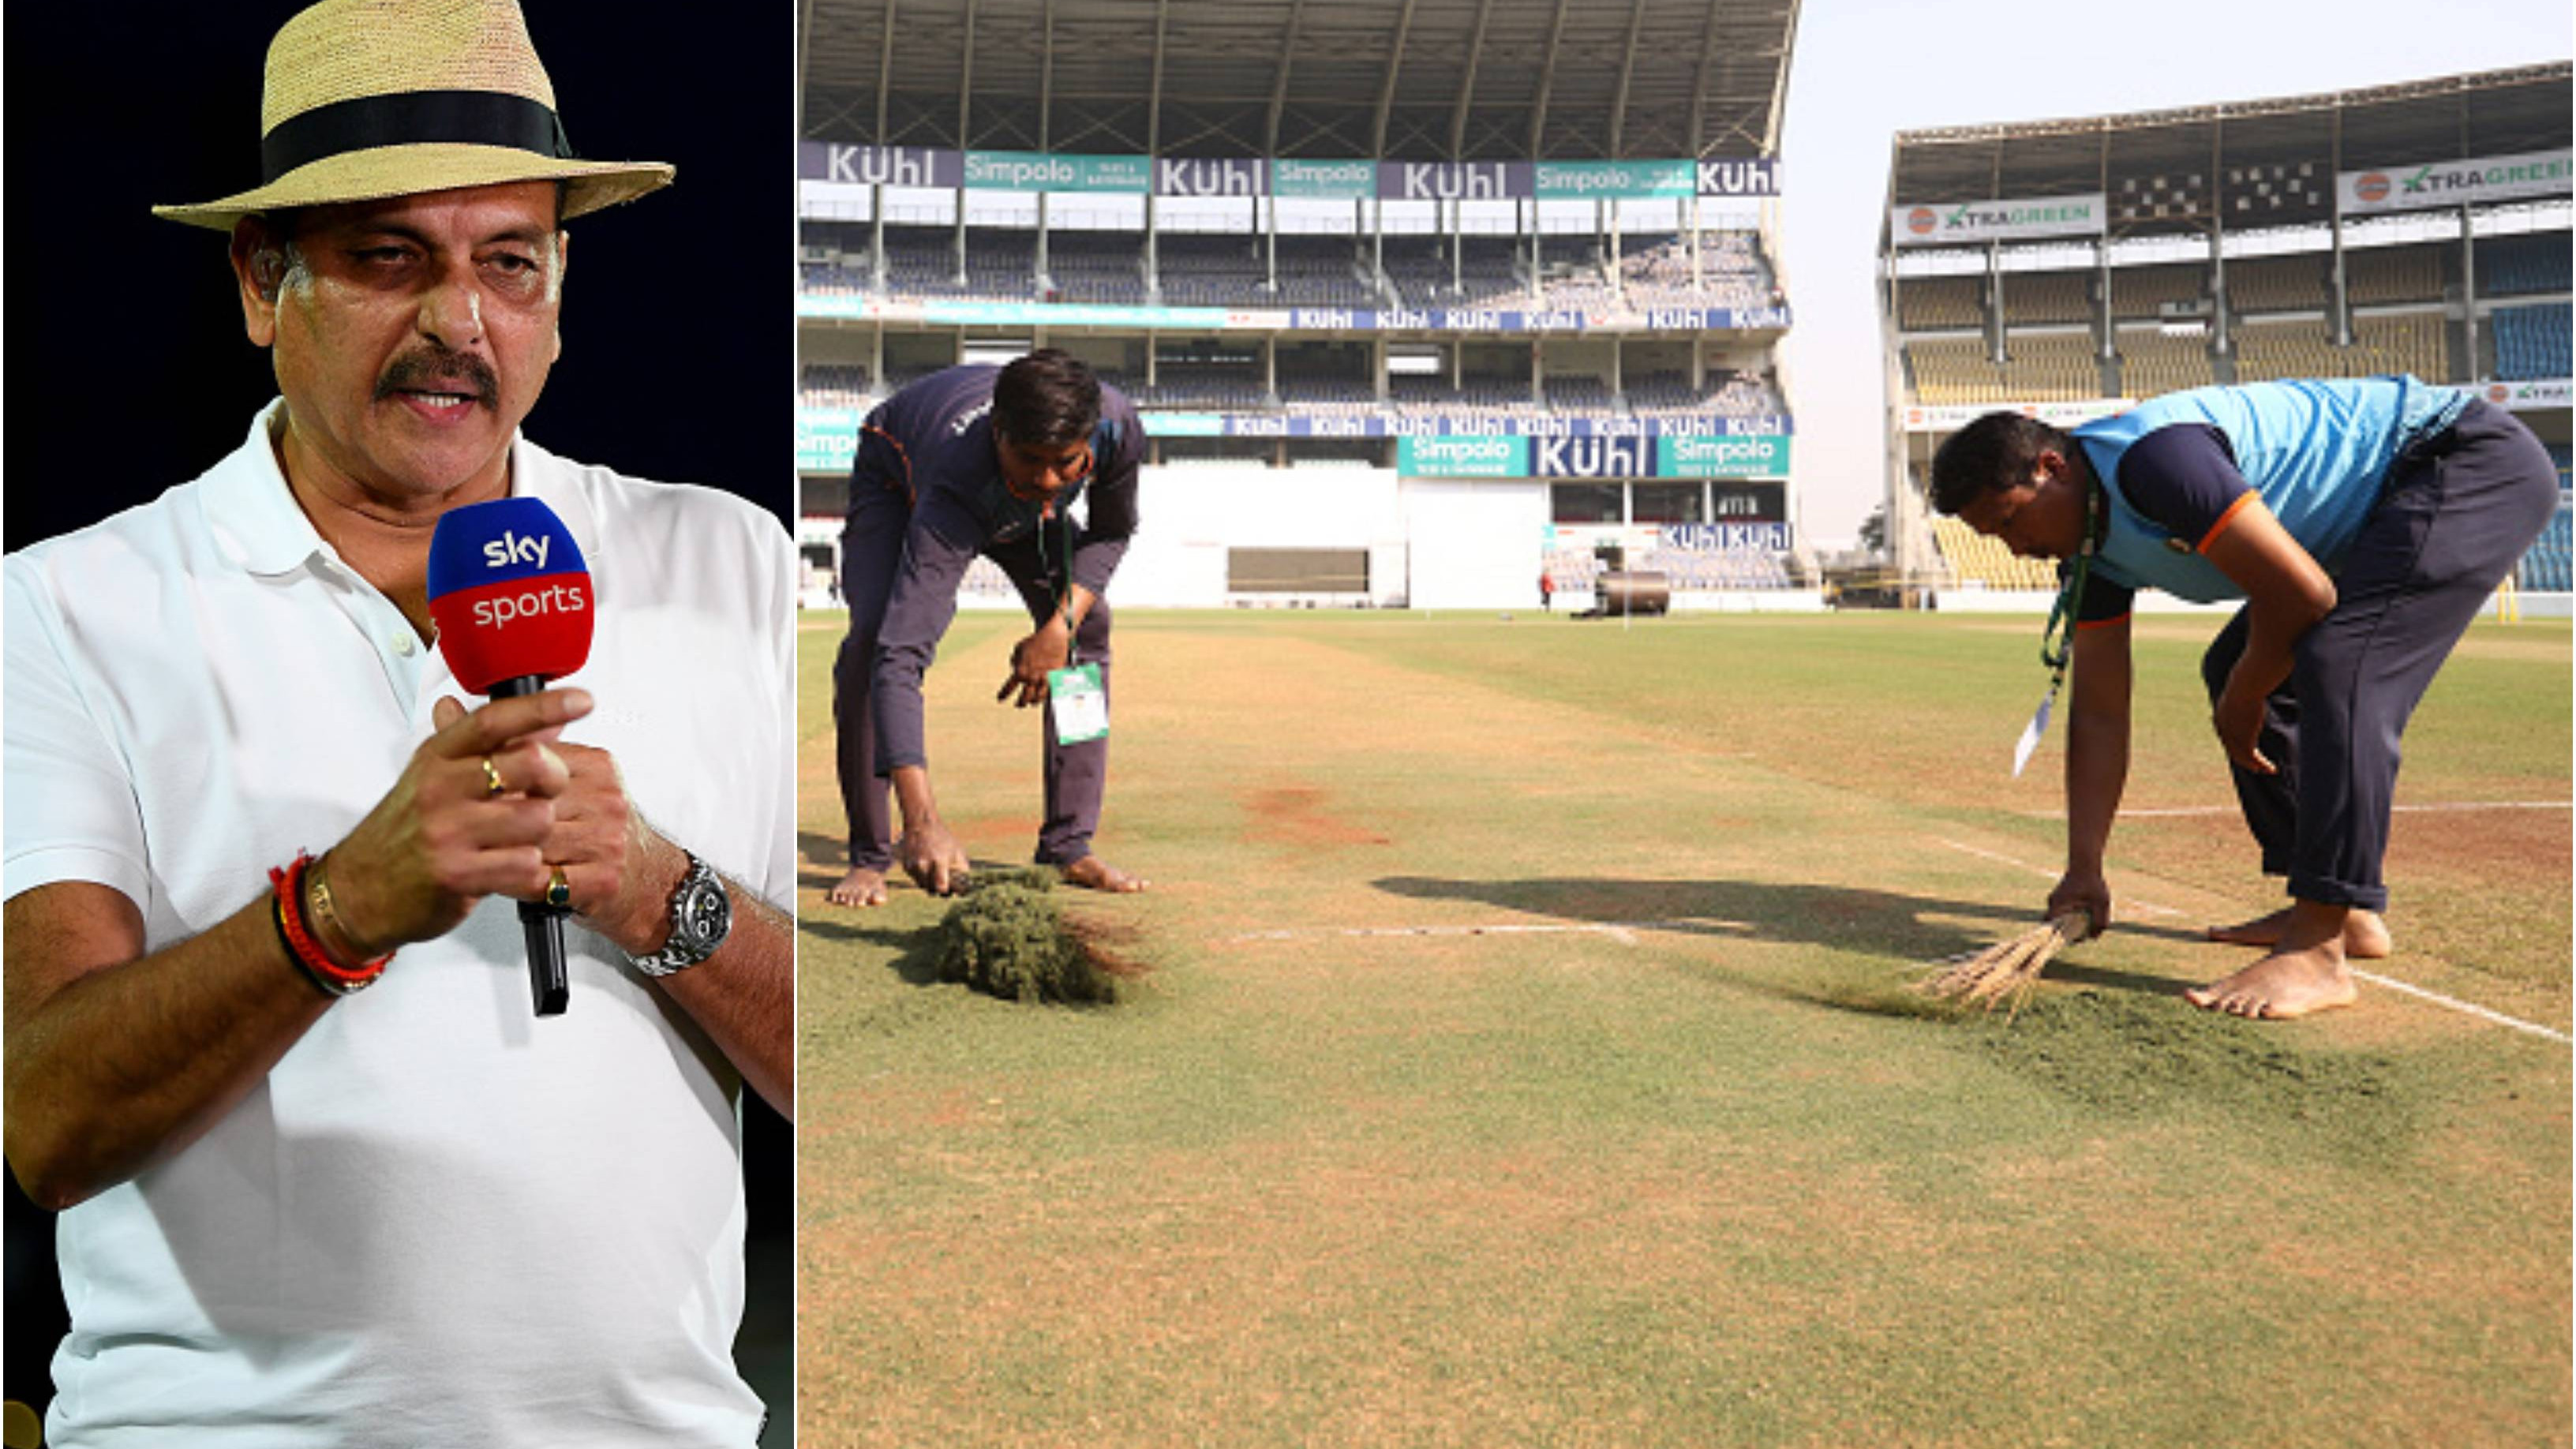 IND v AUS 2023: “I want the ball to turn from Day 1,” Ravi Shastri calls for spinning tracks in Border-Gavaskar Trophy